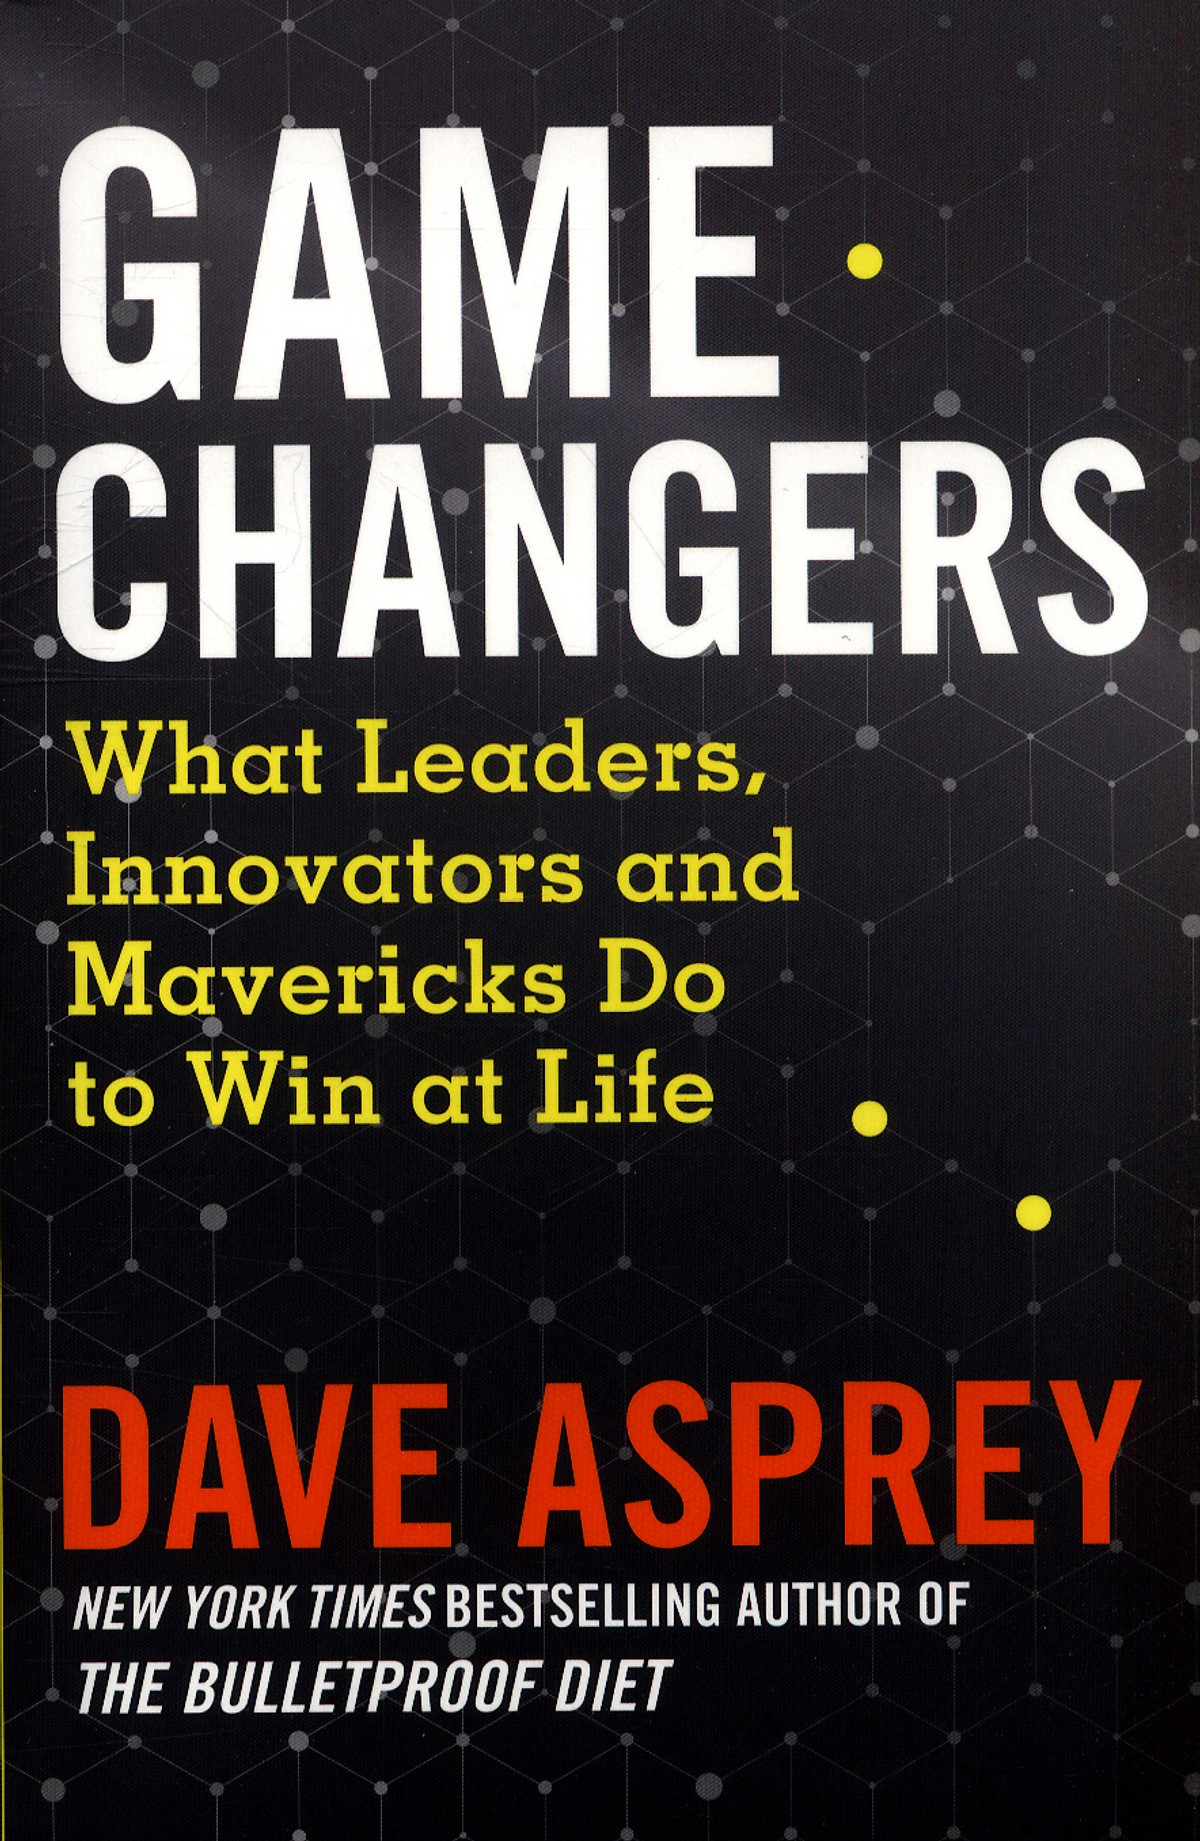 Game Changers: What Leaders, Innovators and Mavericks Do to Win at Life (By Dave Asprey, Author of The Bulletproof Diet)